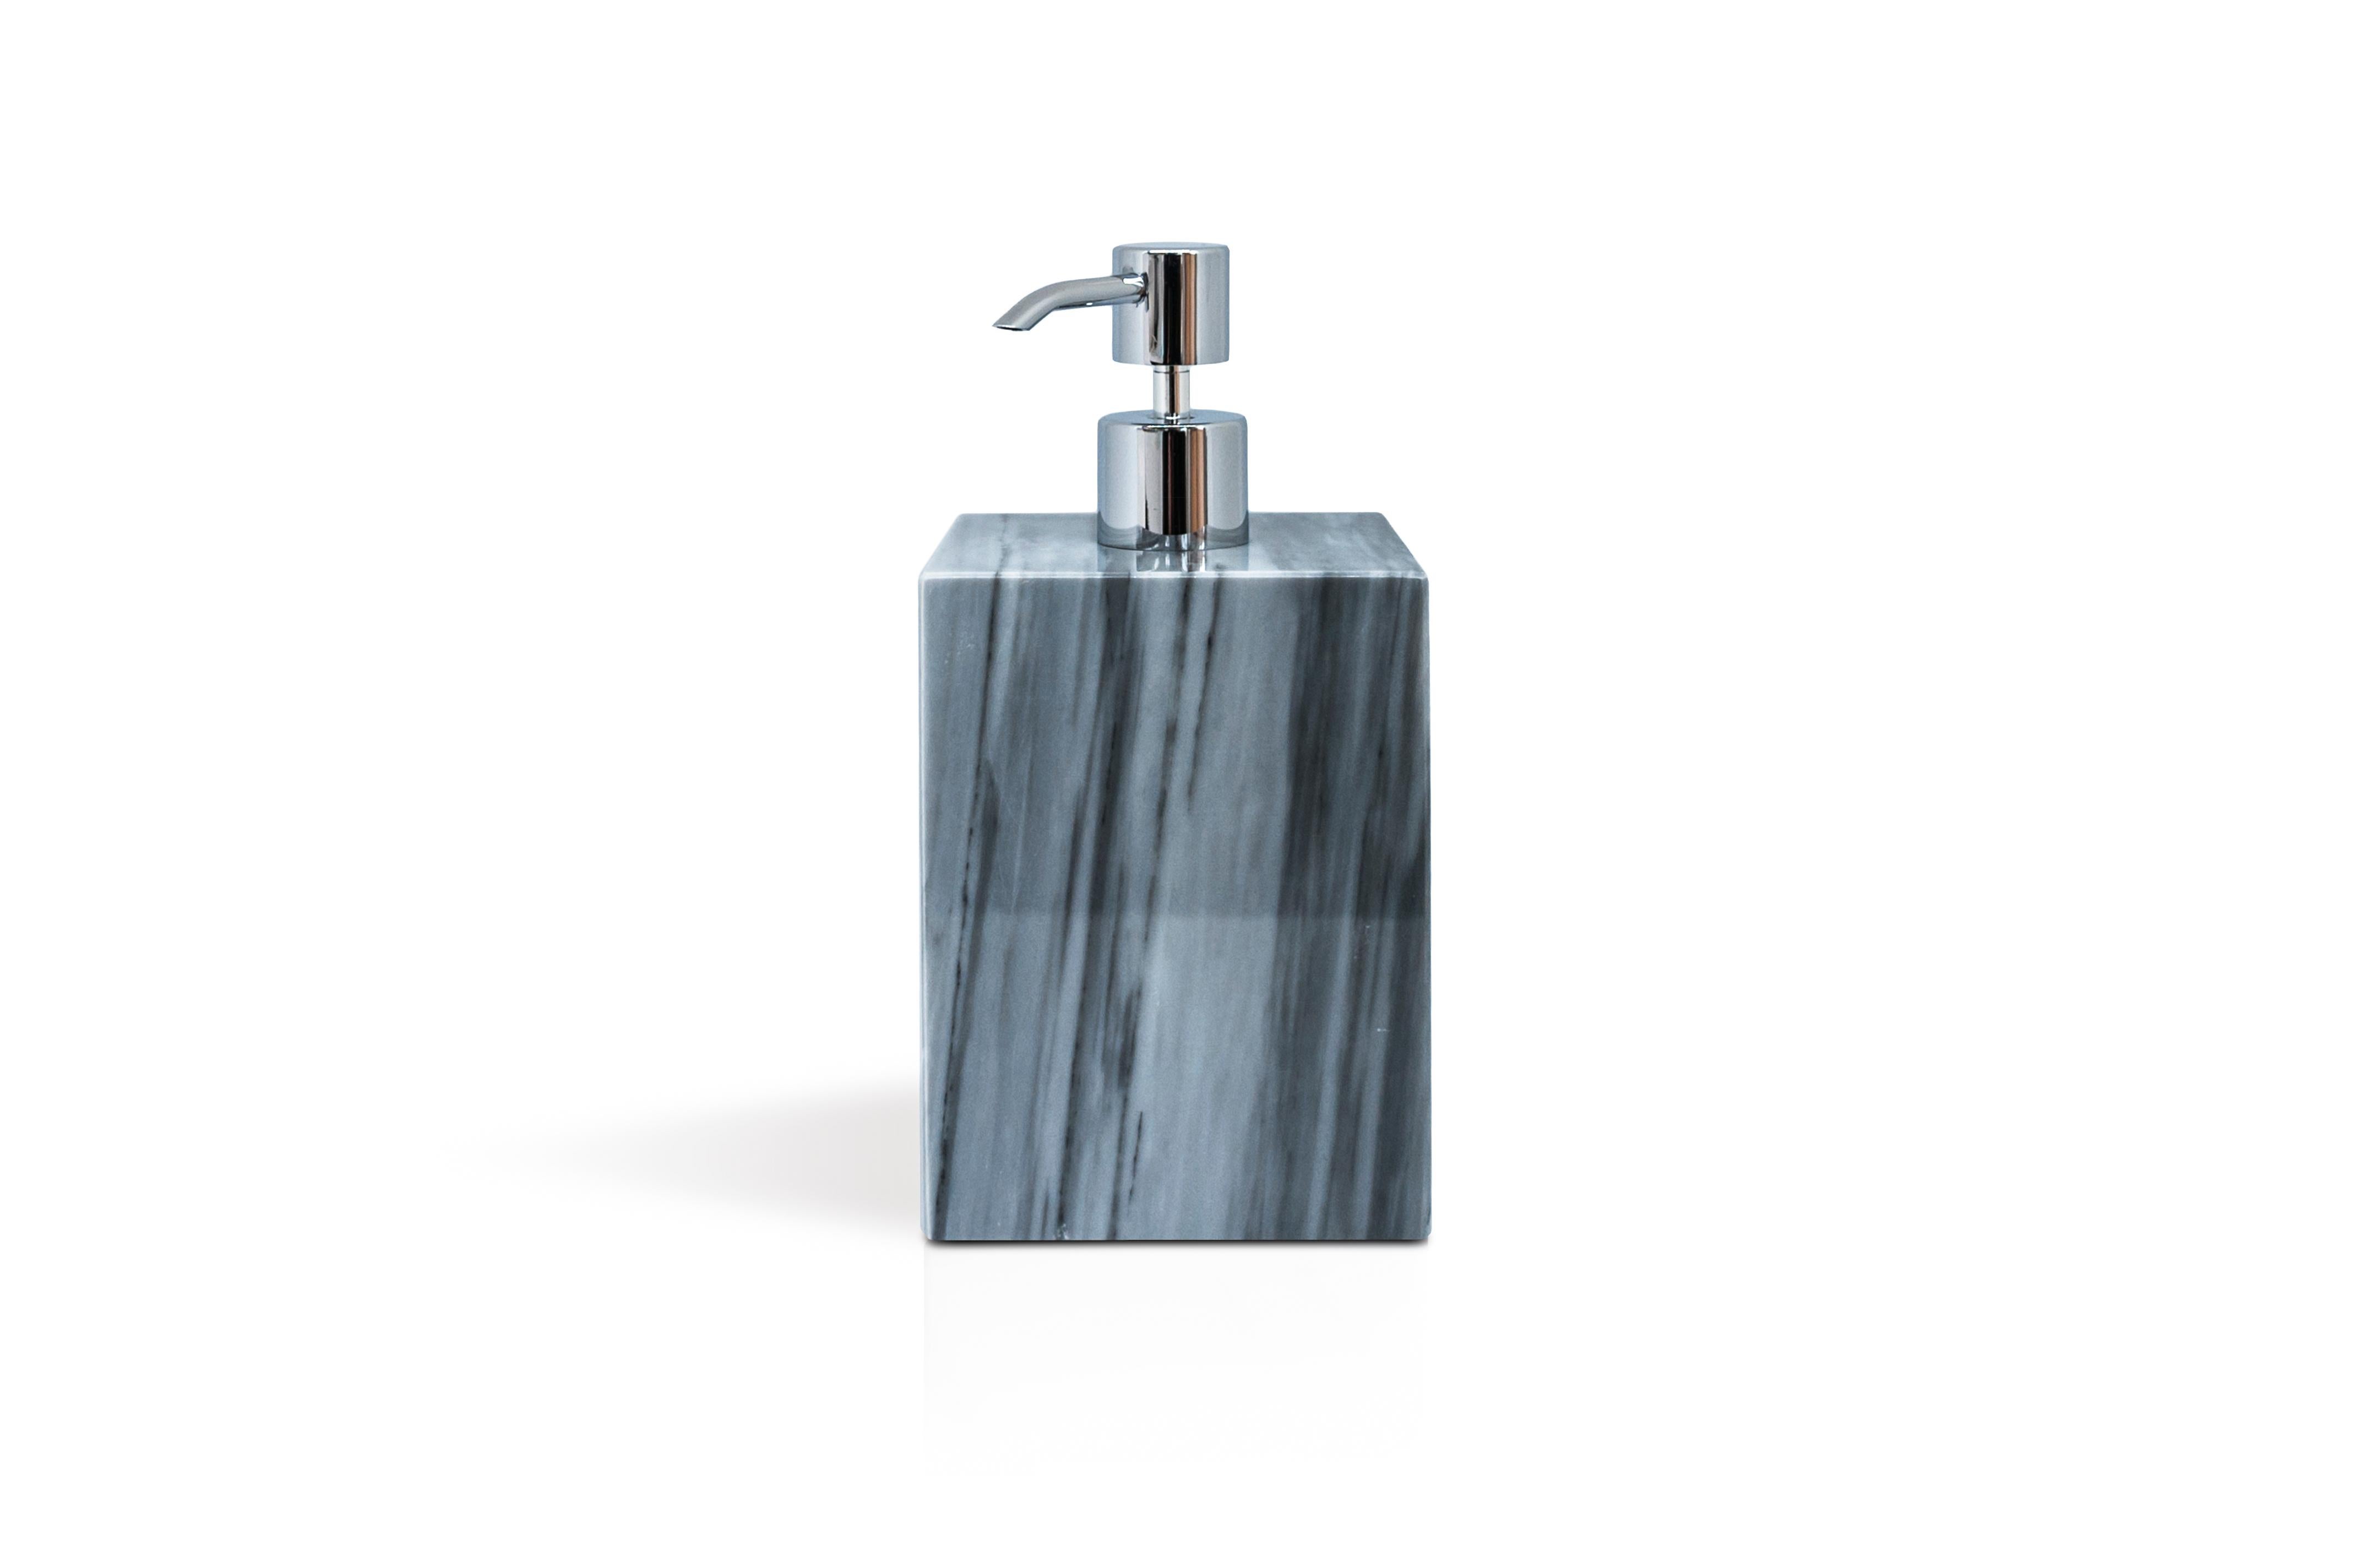 A squared set for the bathroom in grey Bardiglio marble which includes: one soap dispenser (9 x 9 x 19 cm), one soap dish (10 x 13 x 2 cm), one toothbrush holder (8.5 x 8.5 x 12 cm), one box holder with lid (9.5 x 9.5 x 9.5 cm).
Each piece is in a